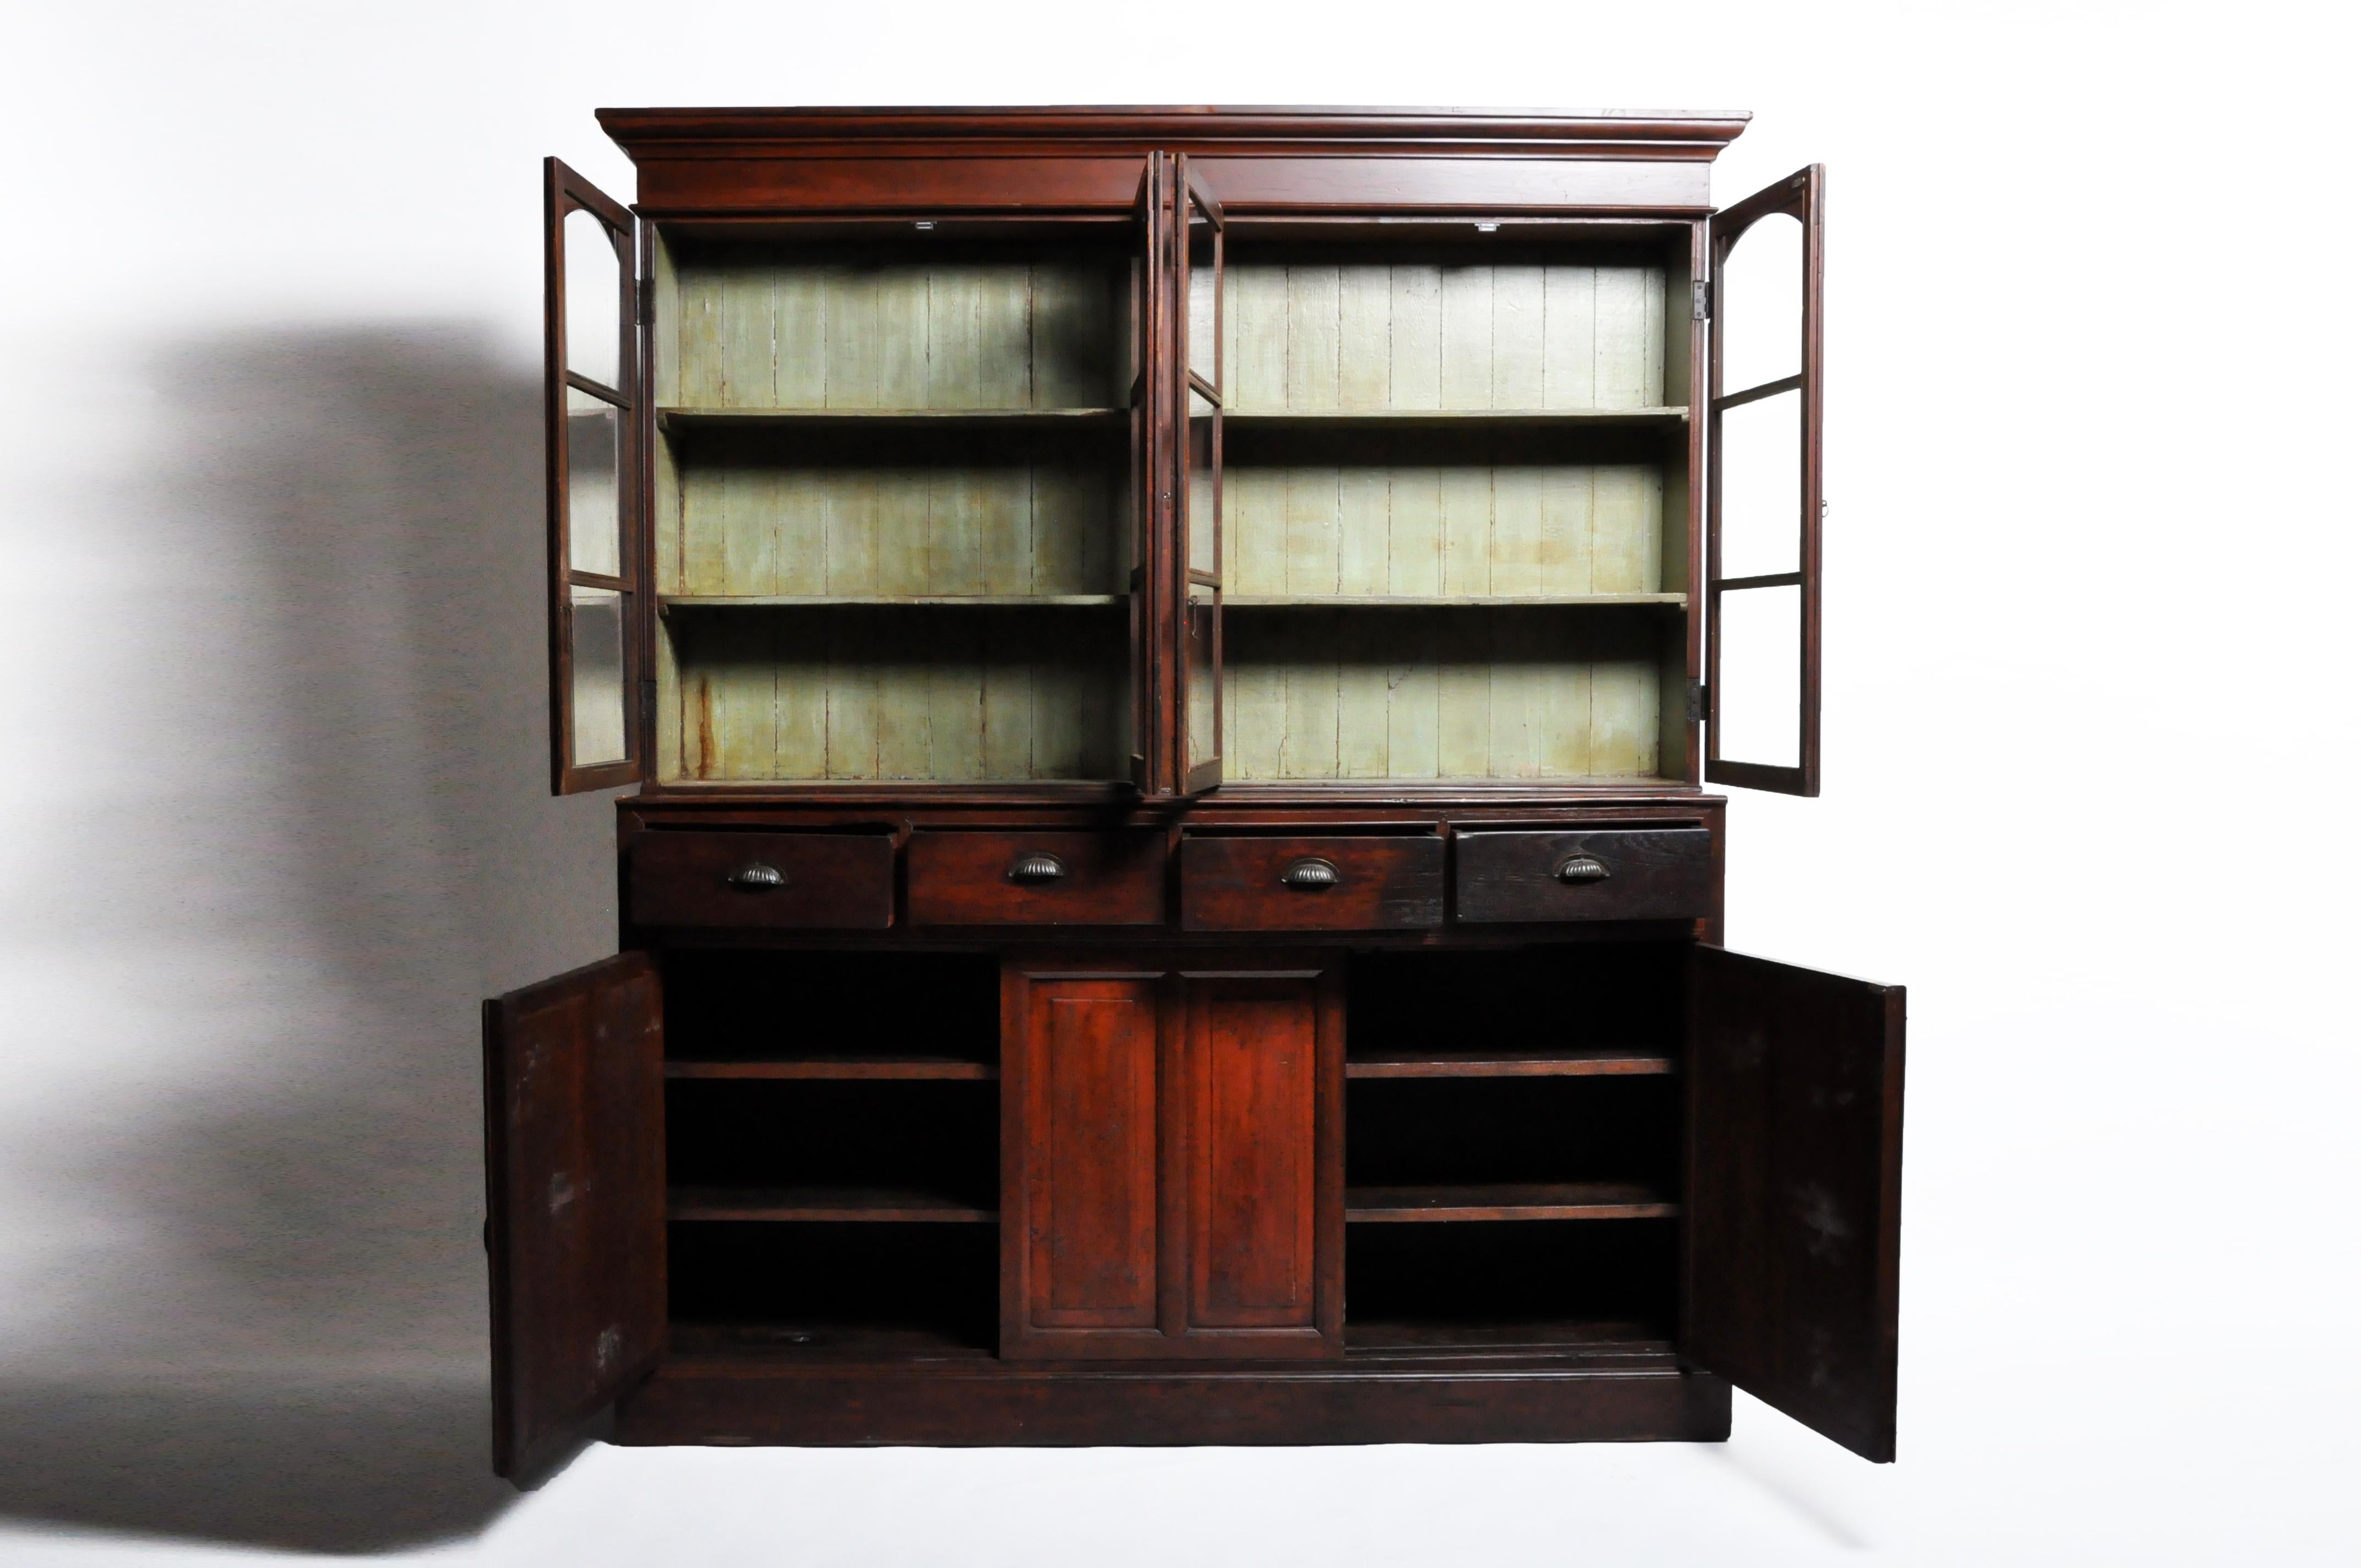 This handsome British Colonial cabinet comes in two parts, the top having 4 glass doors that open up to shelves for ample storage over another set of 3 doors with additional shelves, and 4 drawers for additional storage. Both open to compartments